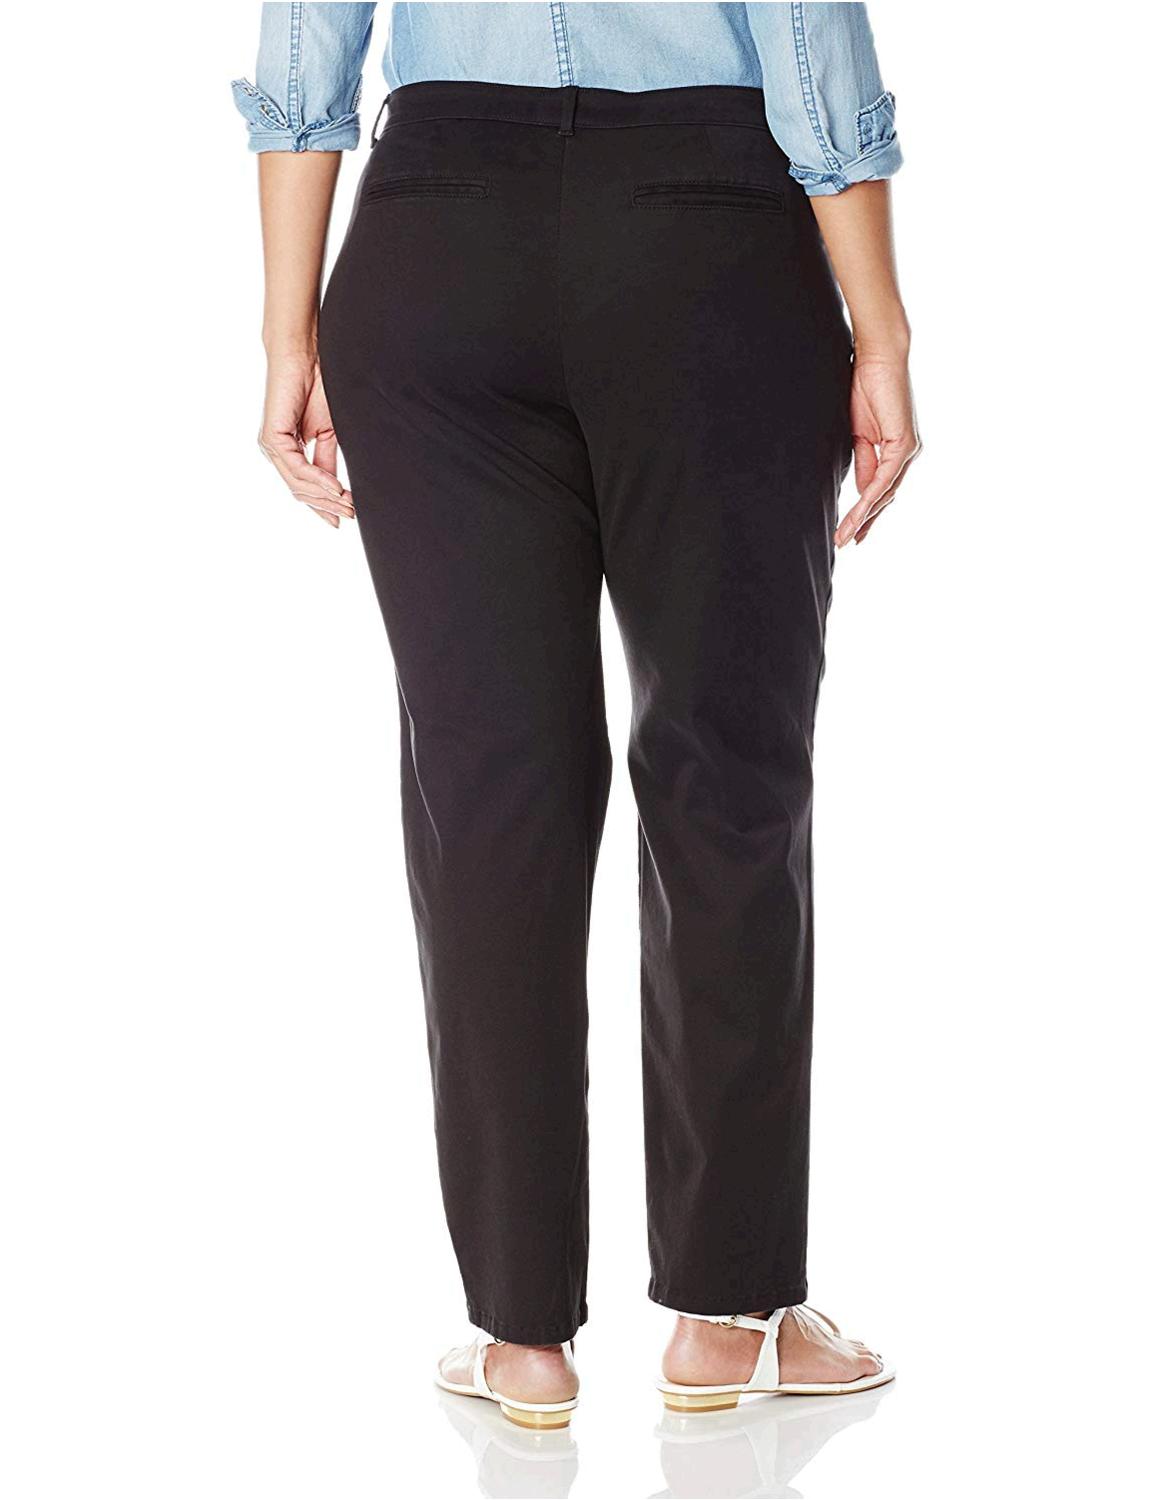 Lee Women's Plus-Size Relaxed-Fit All Day Pant, Black, 24W, Black, Size ...